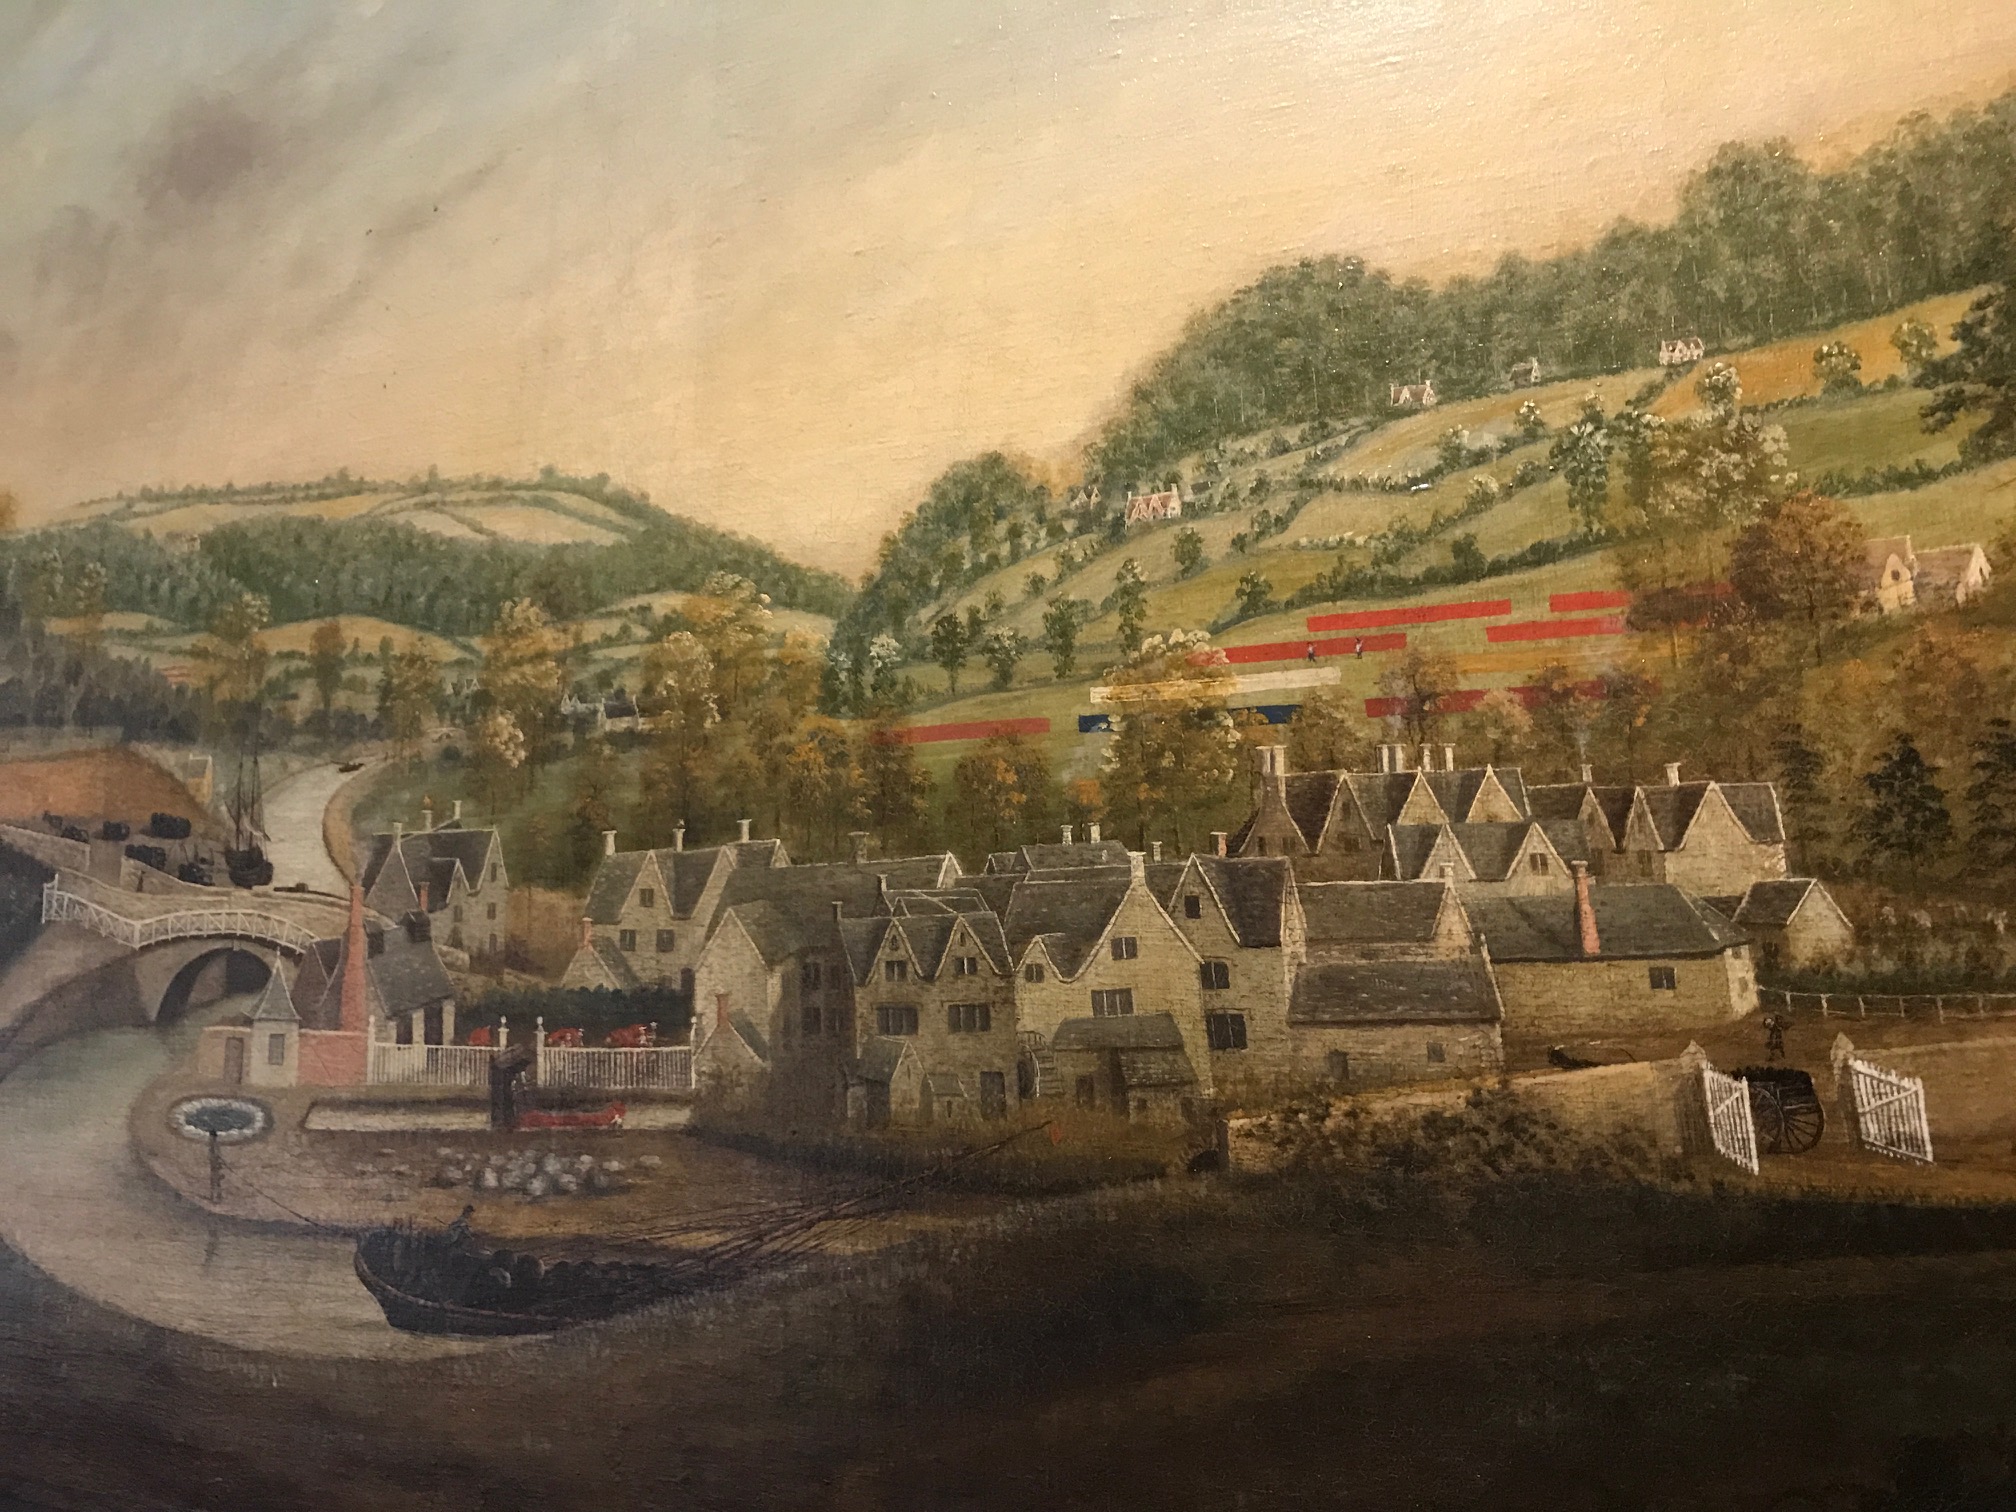 Cotswolds: Stroud. Early nineteenth century.